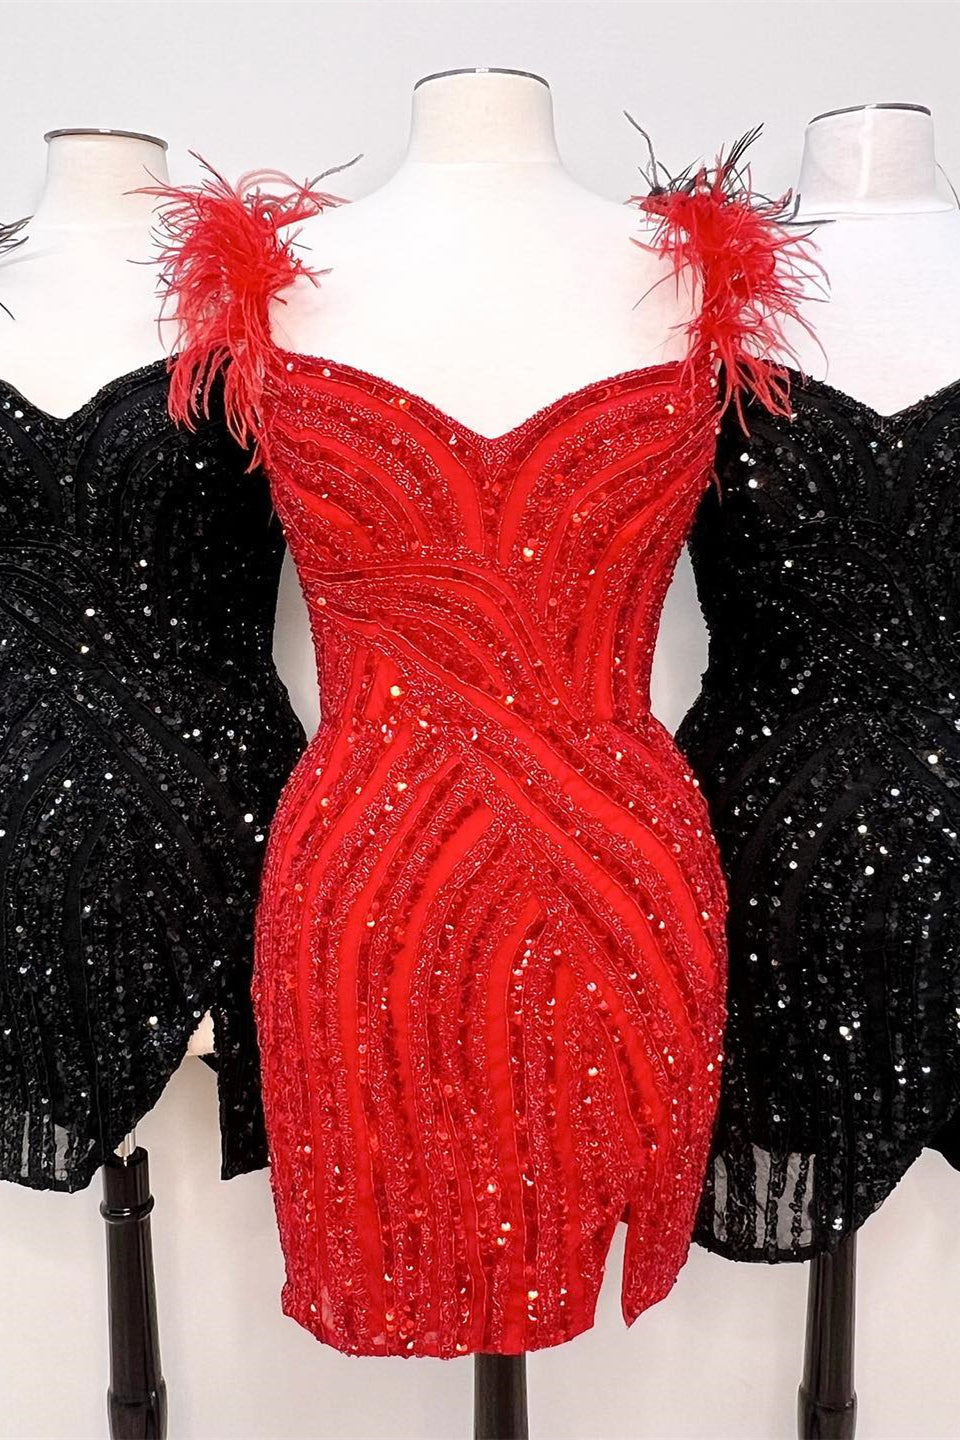 Black Tie Wedding Guest Dress, Red V Neck Feathers Sequins Sheath Homecoming Dress